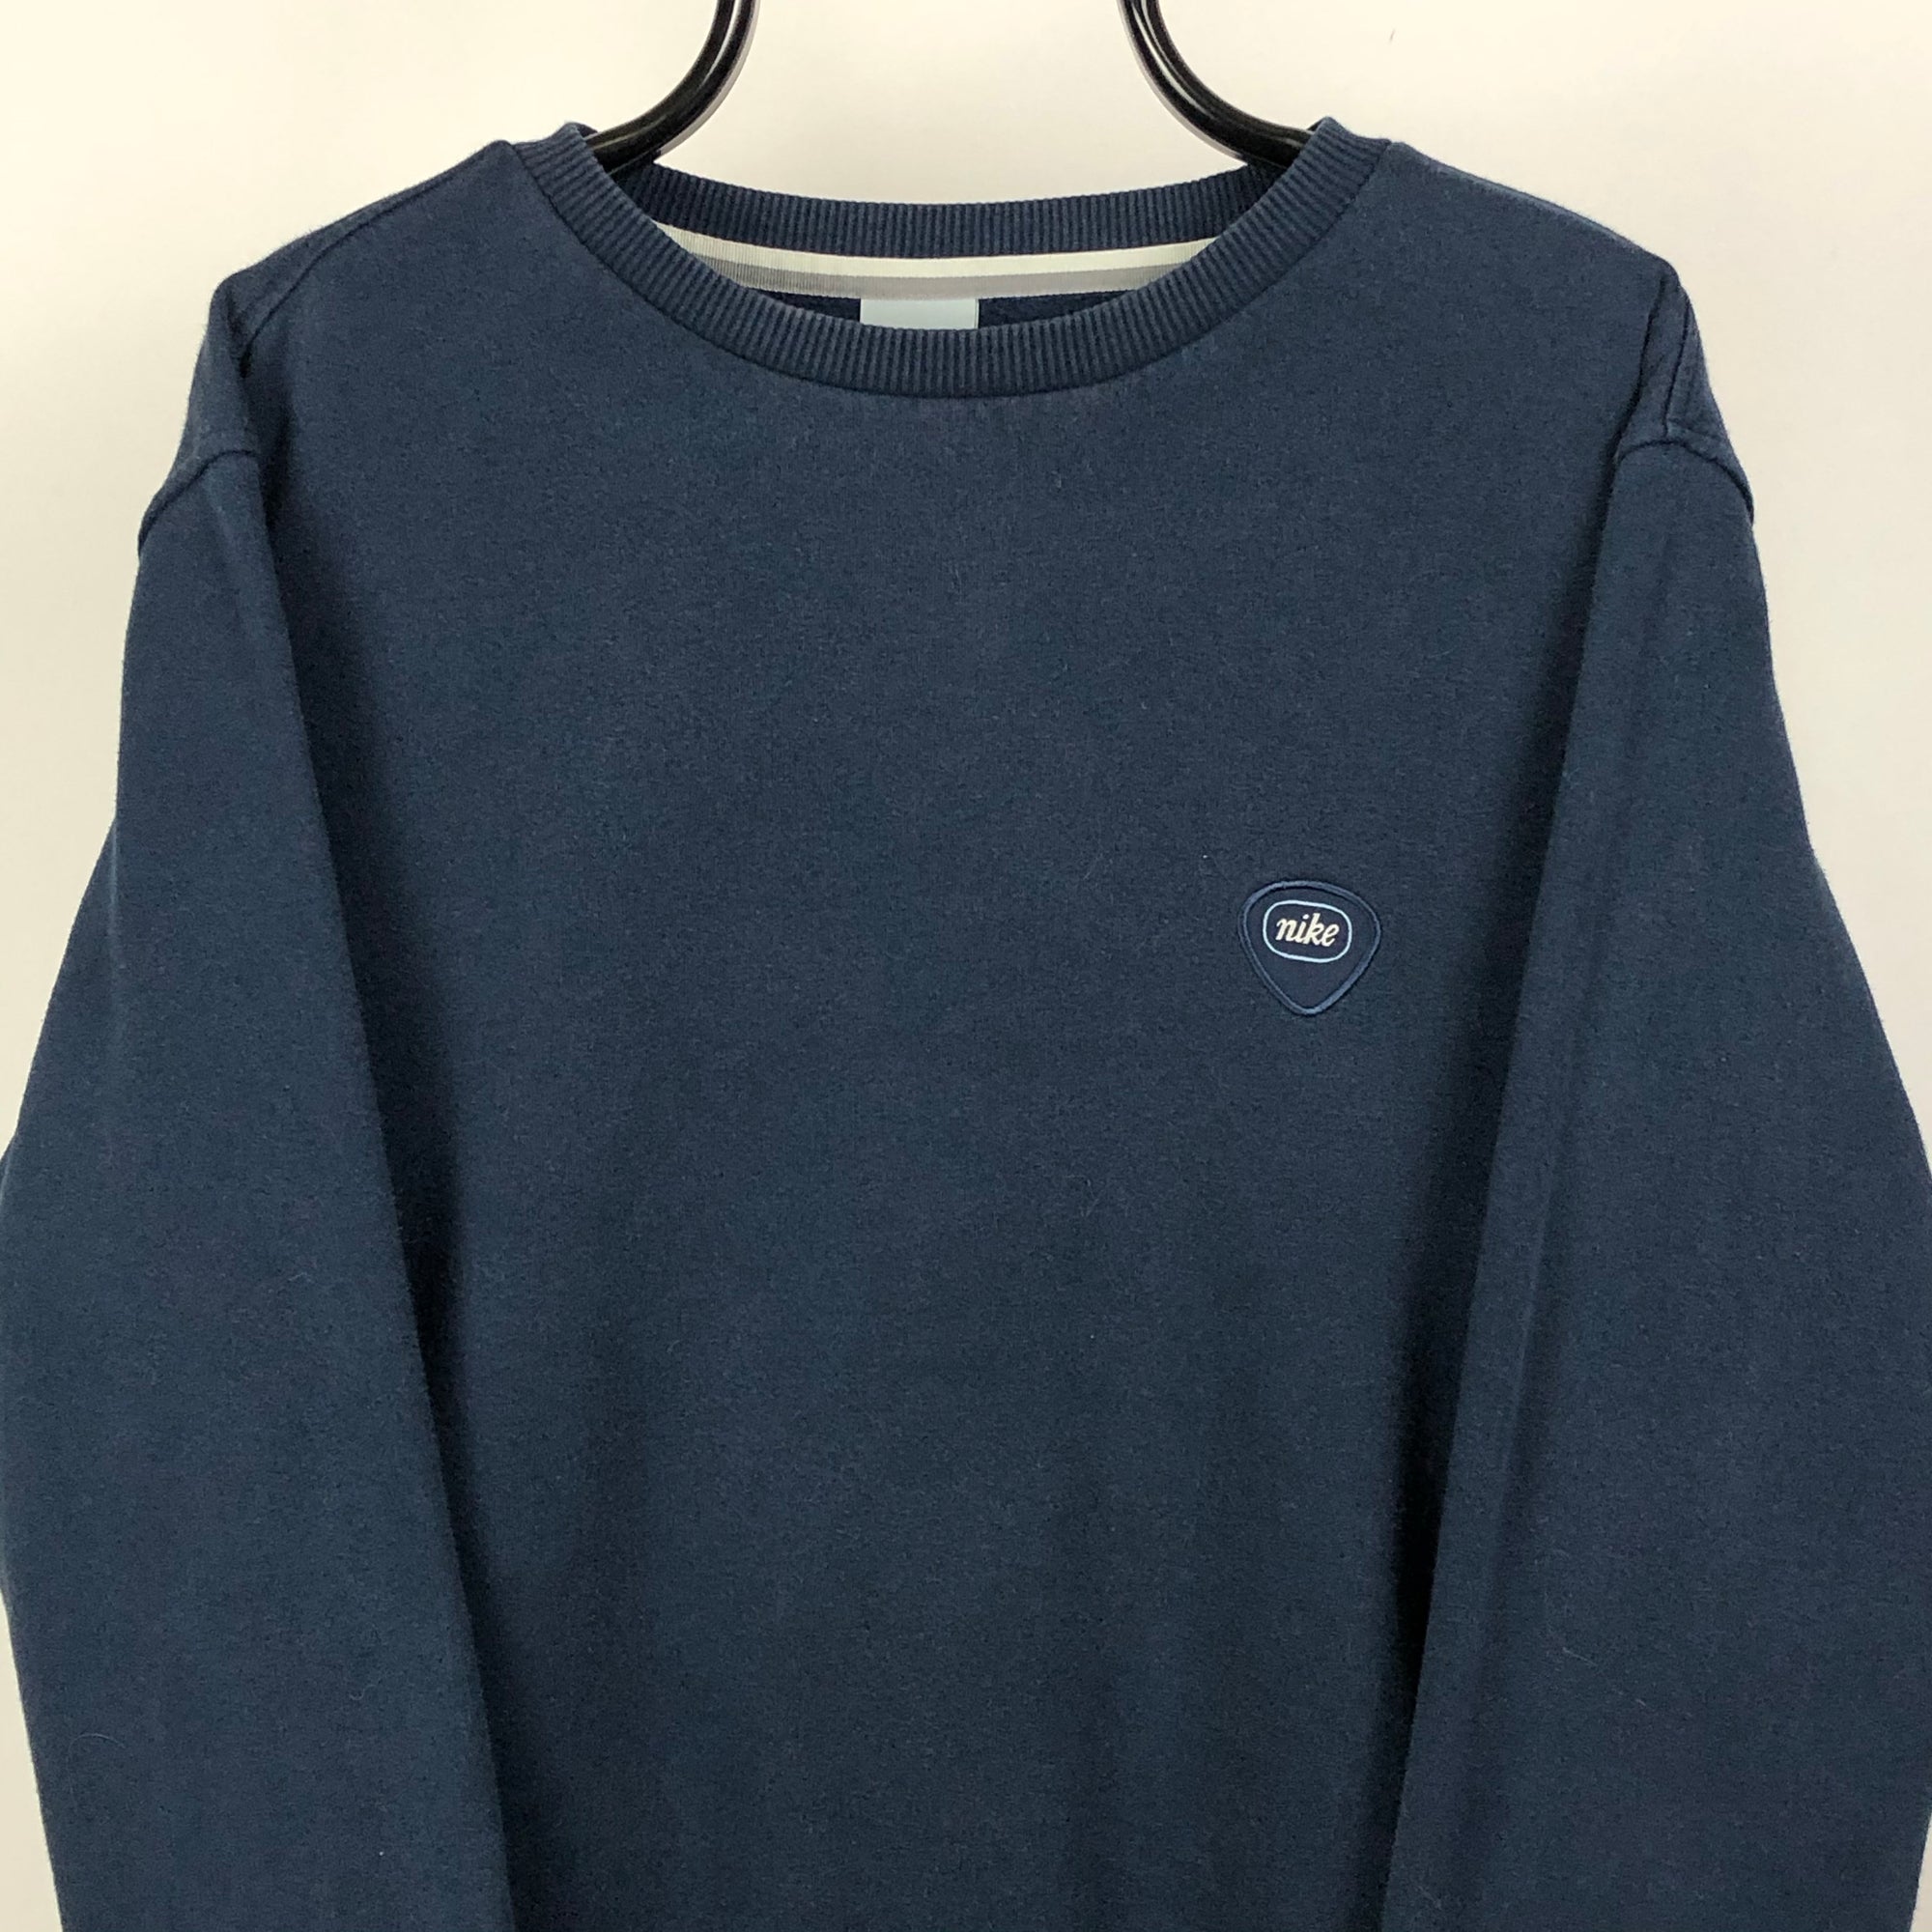 Vintage Nike Embroidered Small Logo Sweatshirt in Navy - Men’s Large/Women’s XL